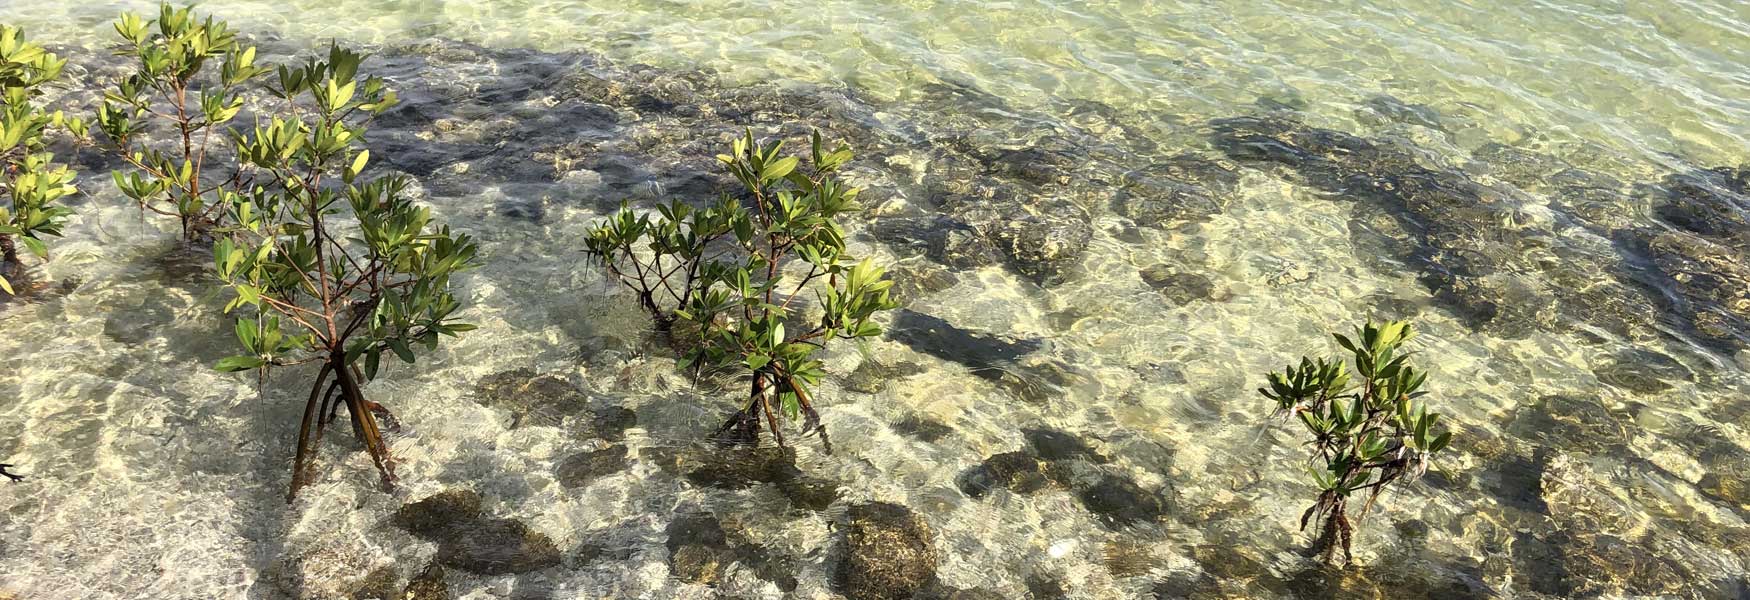 Photo of young mangroves